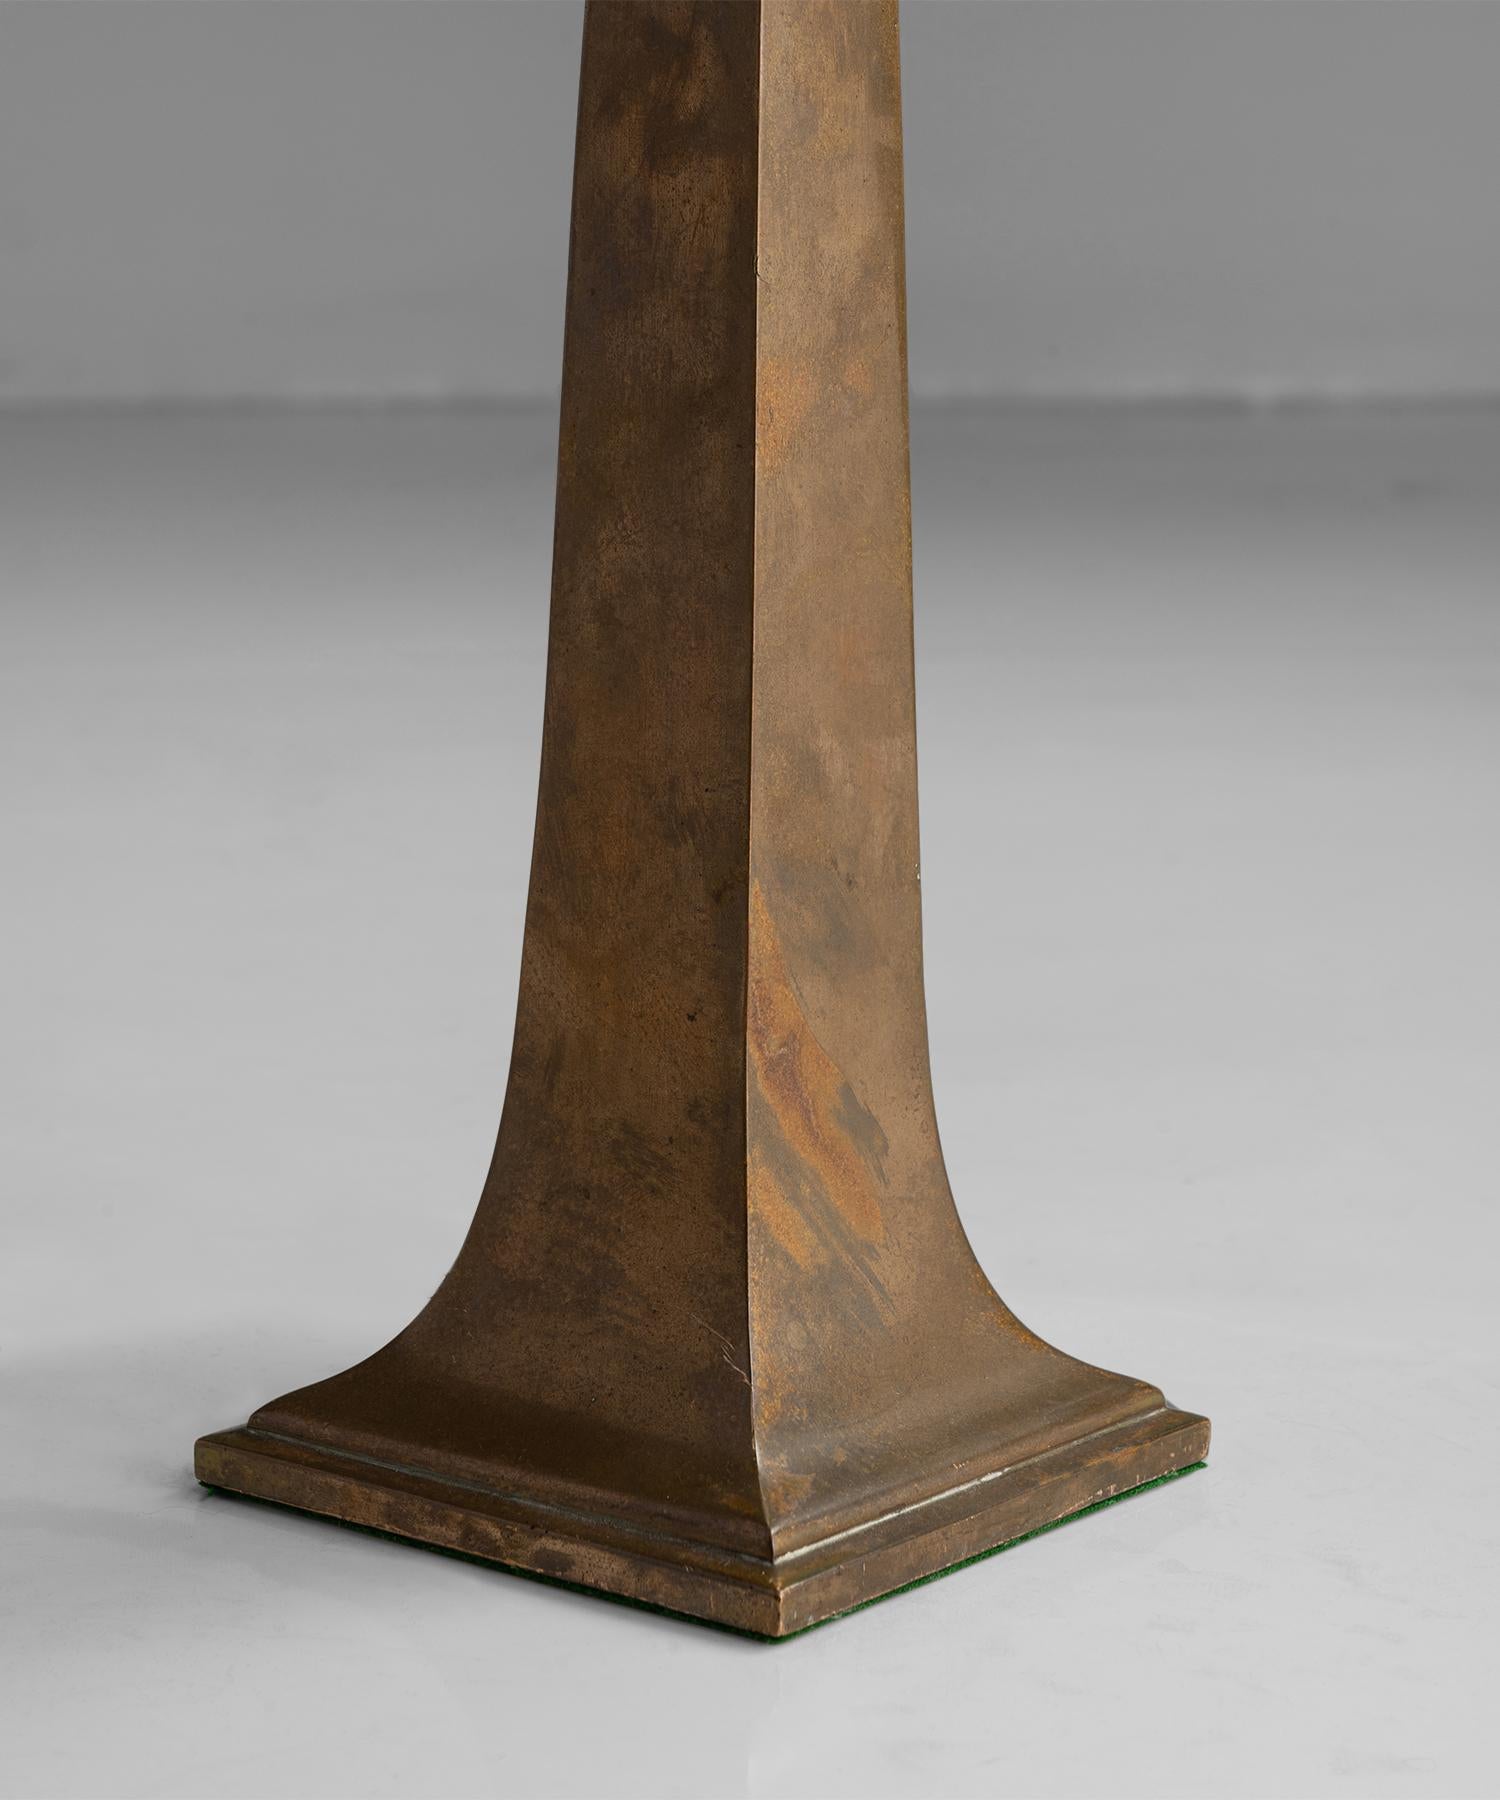 Brass & copper table lamp

England Circa 1920

Patinated copper shade with cast brass stand.

Measures: 11”diameter x 27” height.